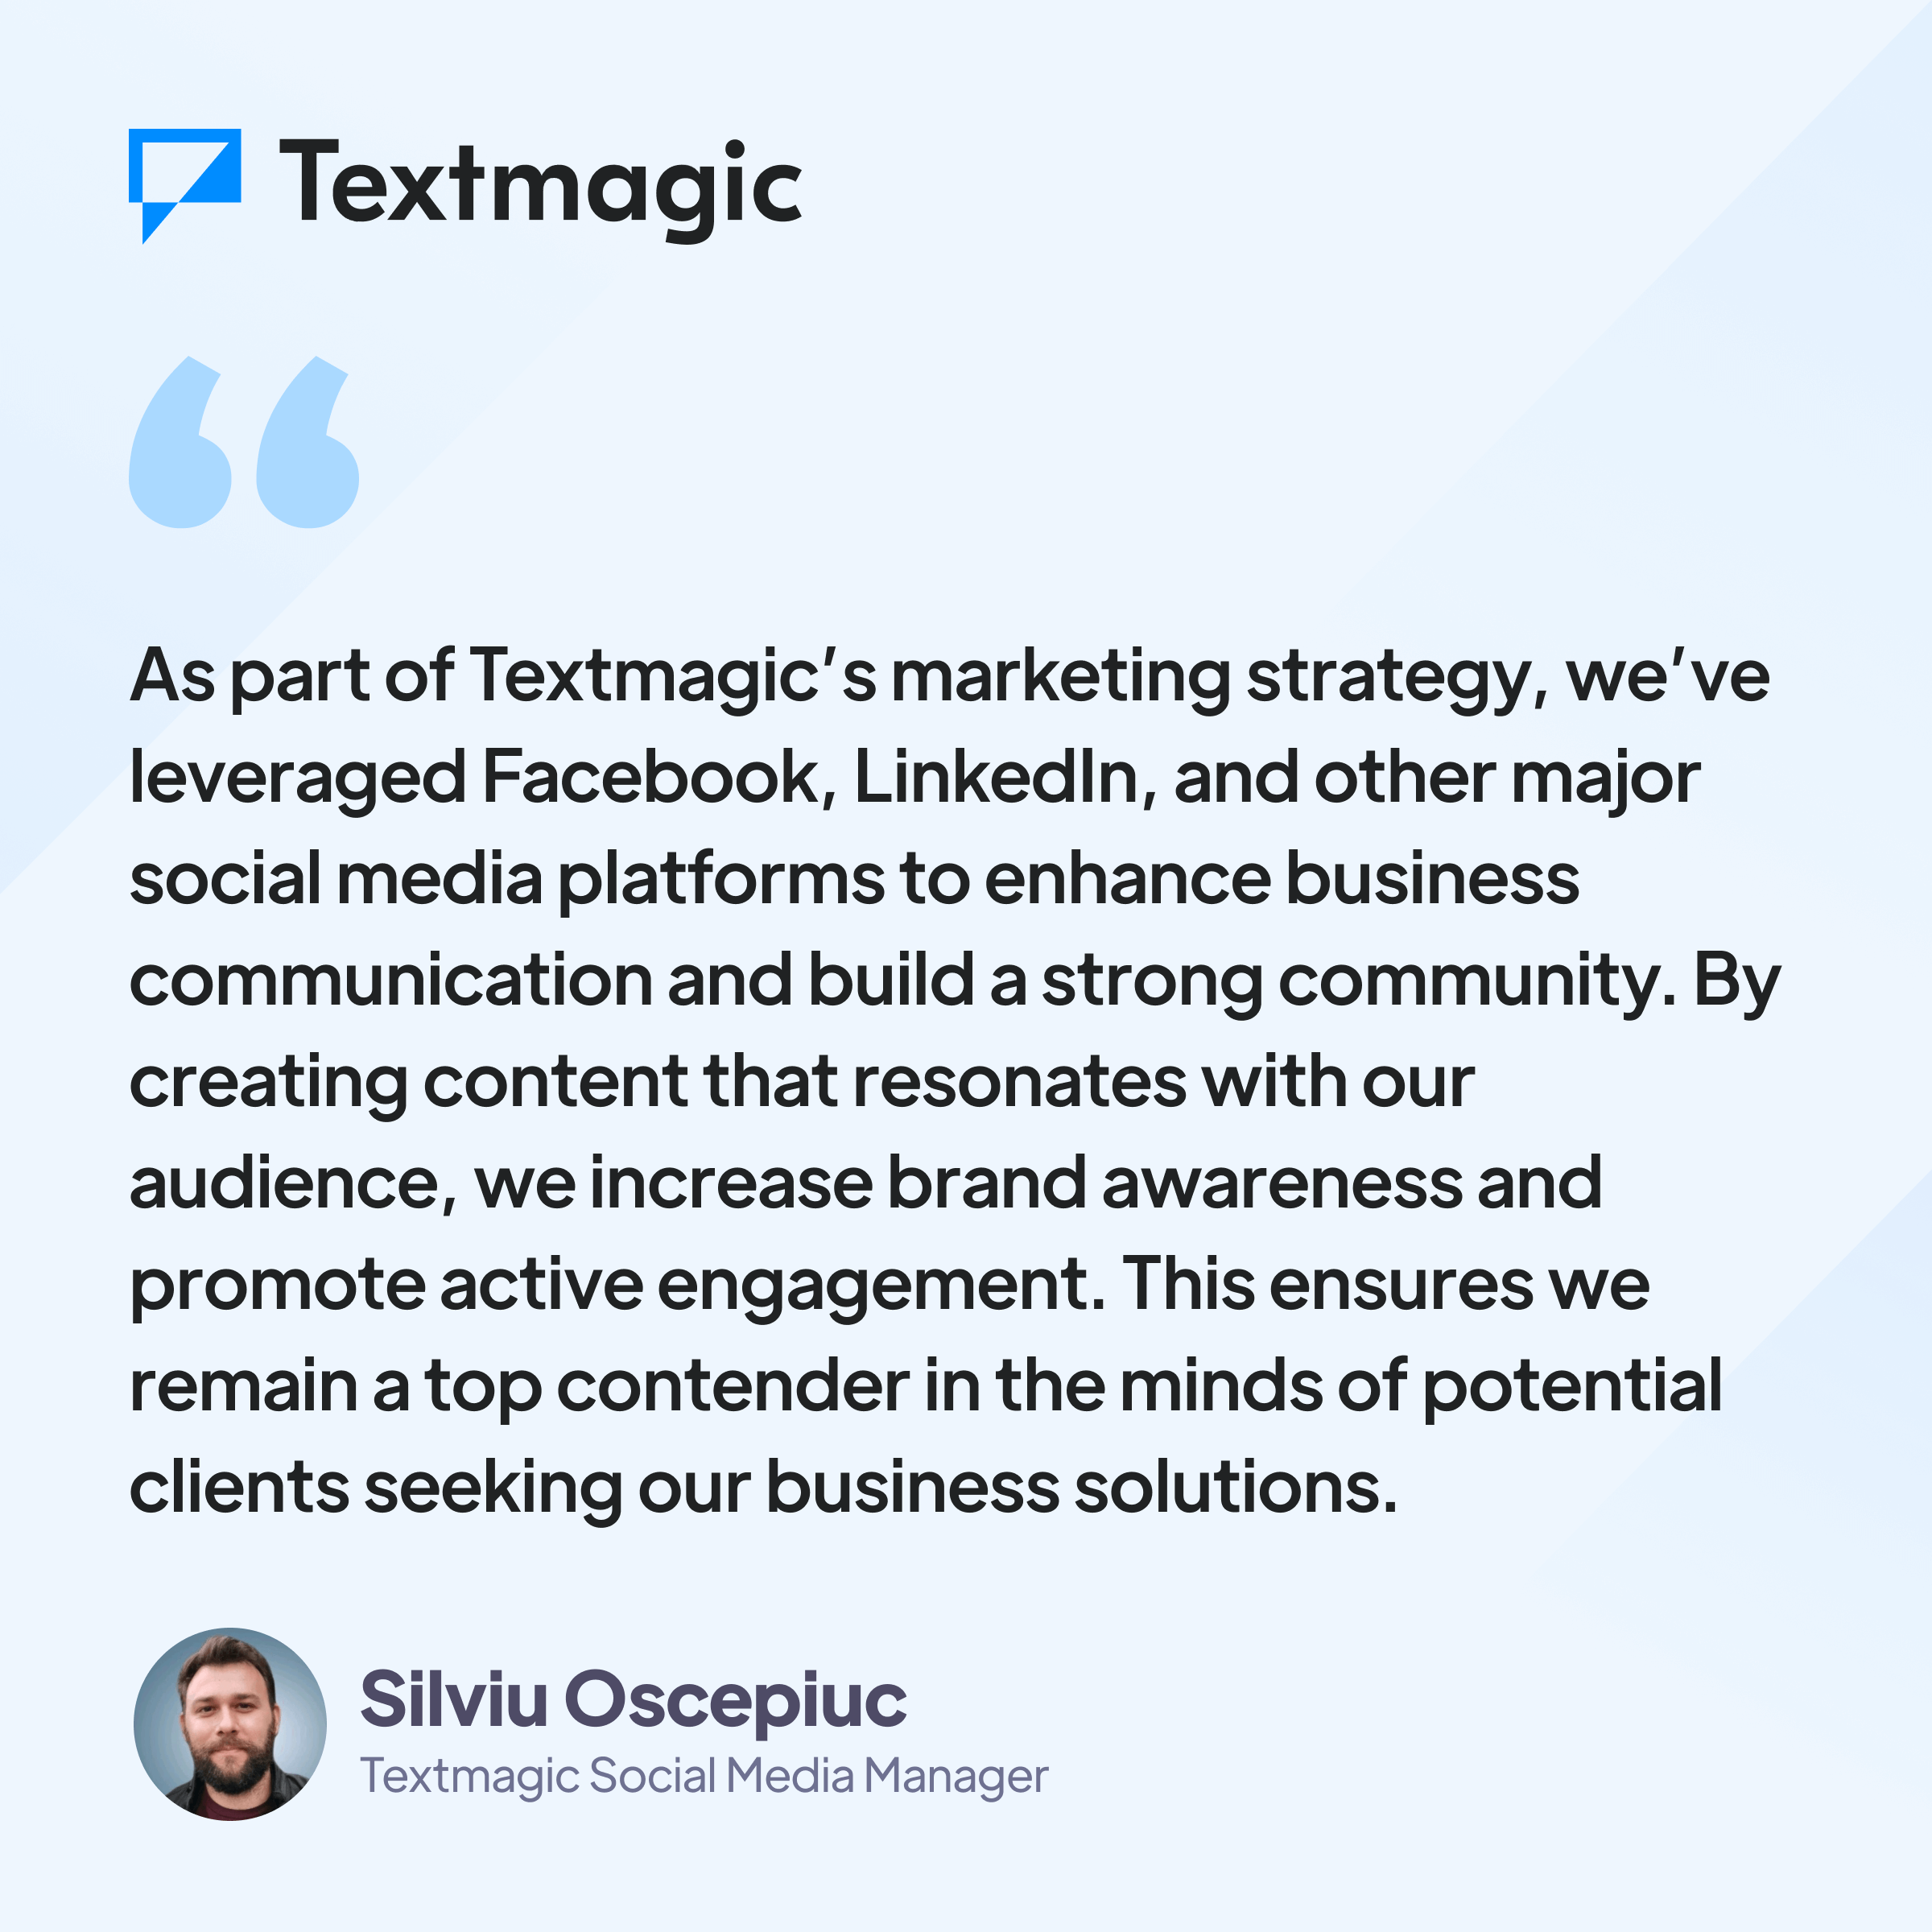 Quote from Textmagic social media manager